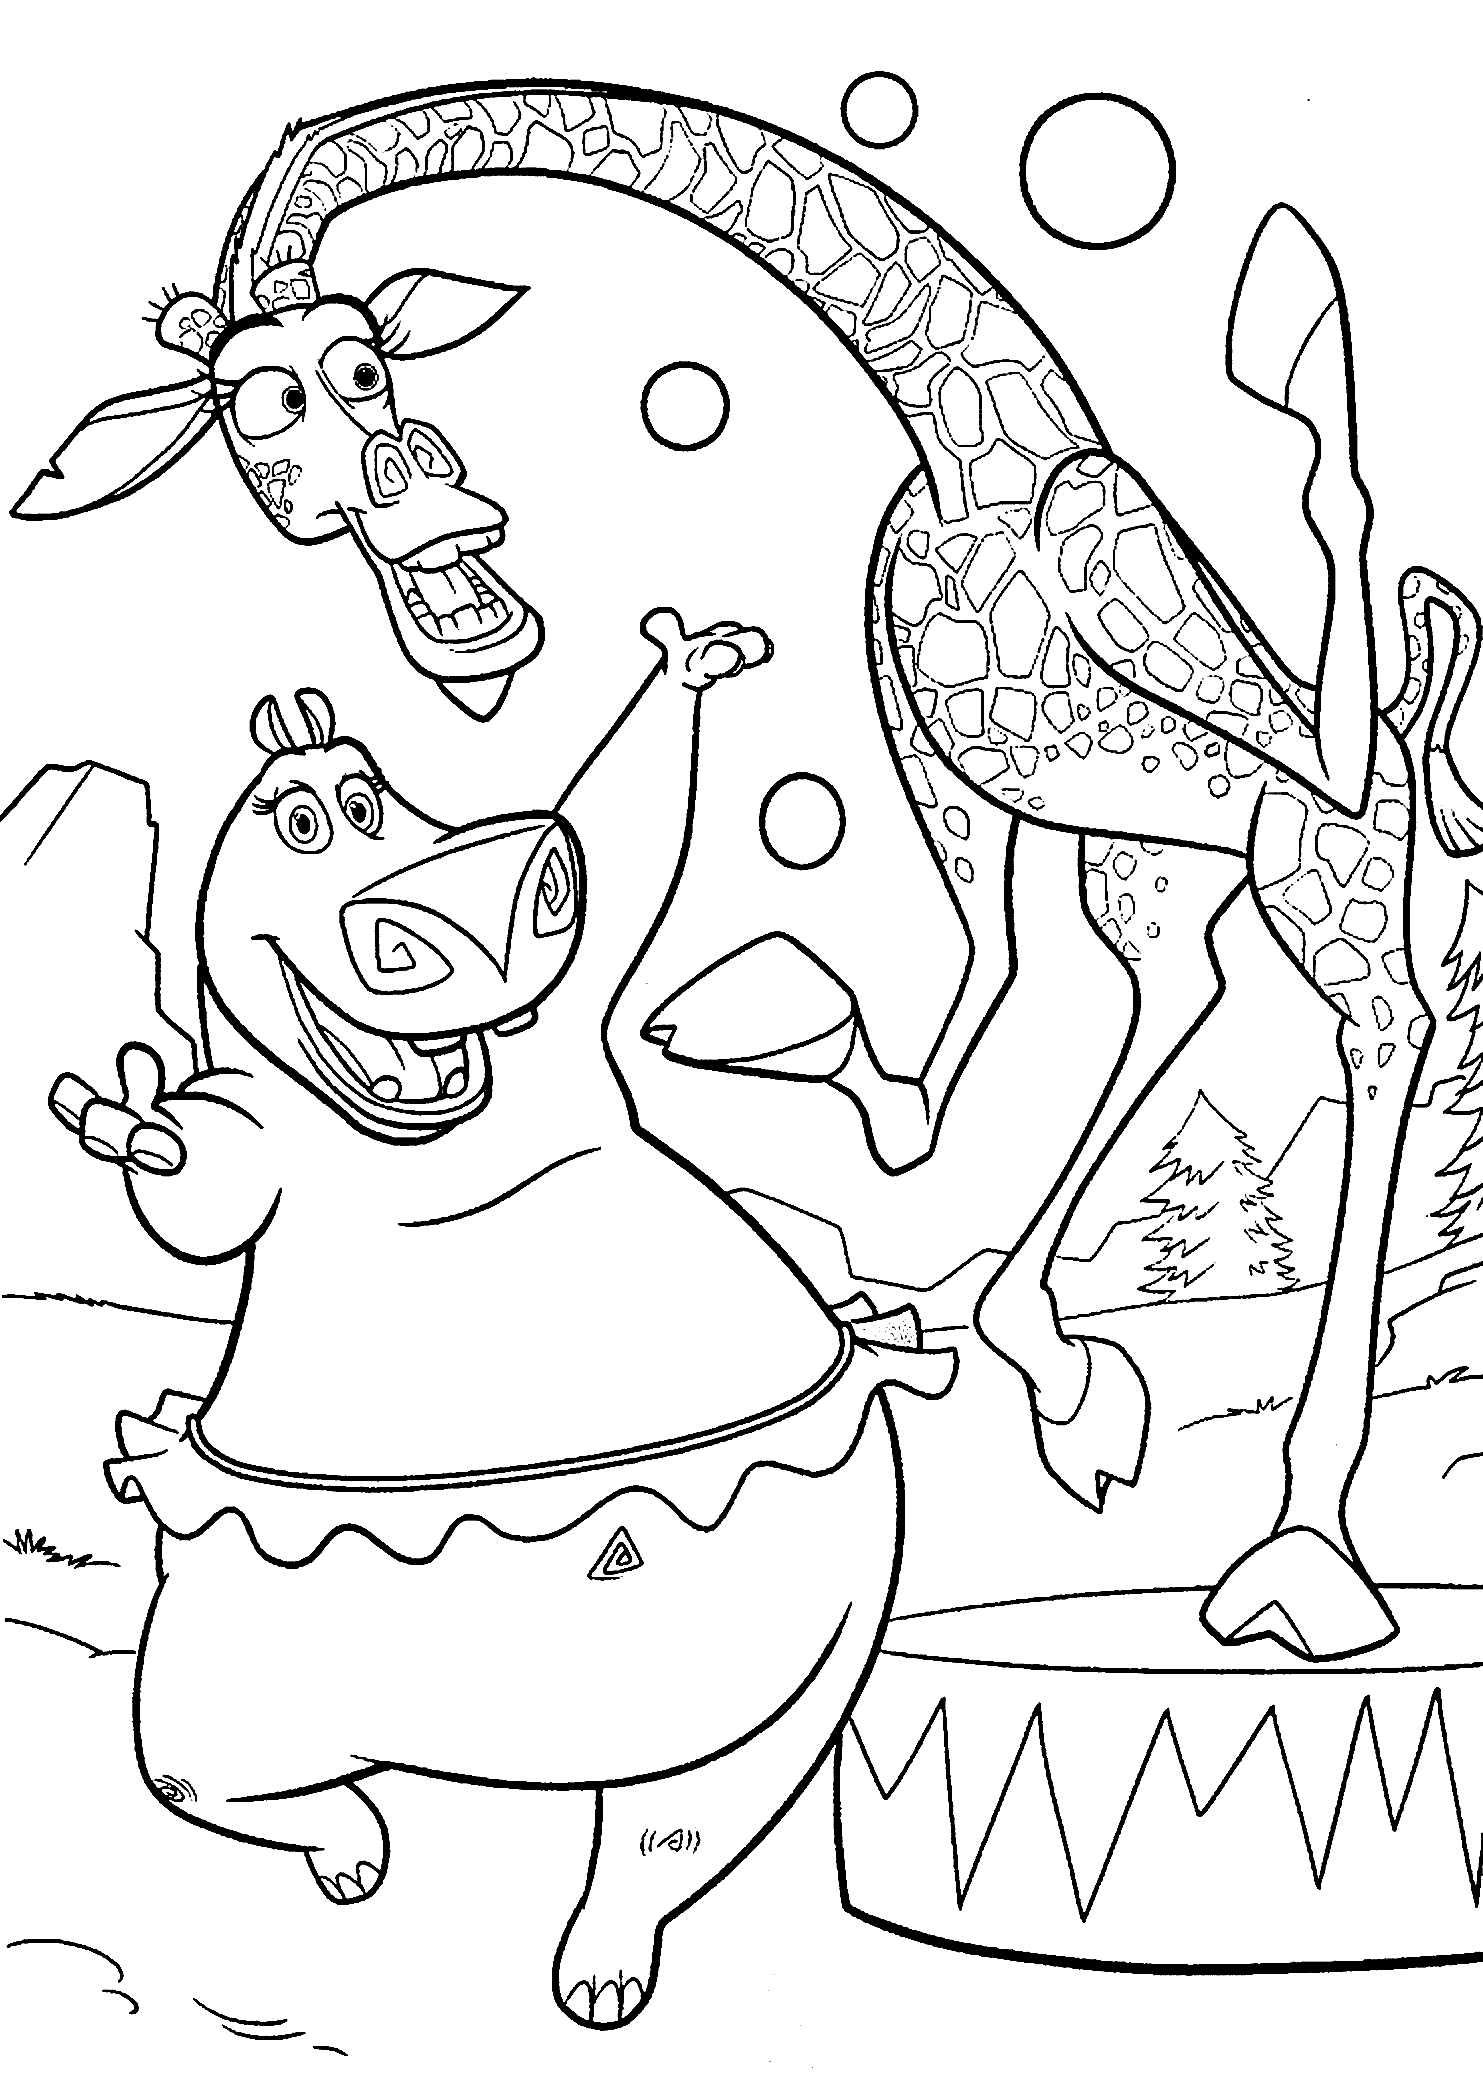 sheenaowens-madagascar-coloring-pages